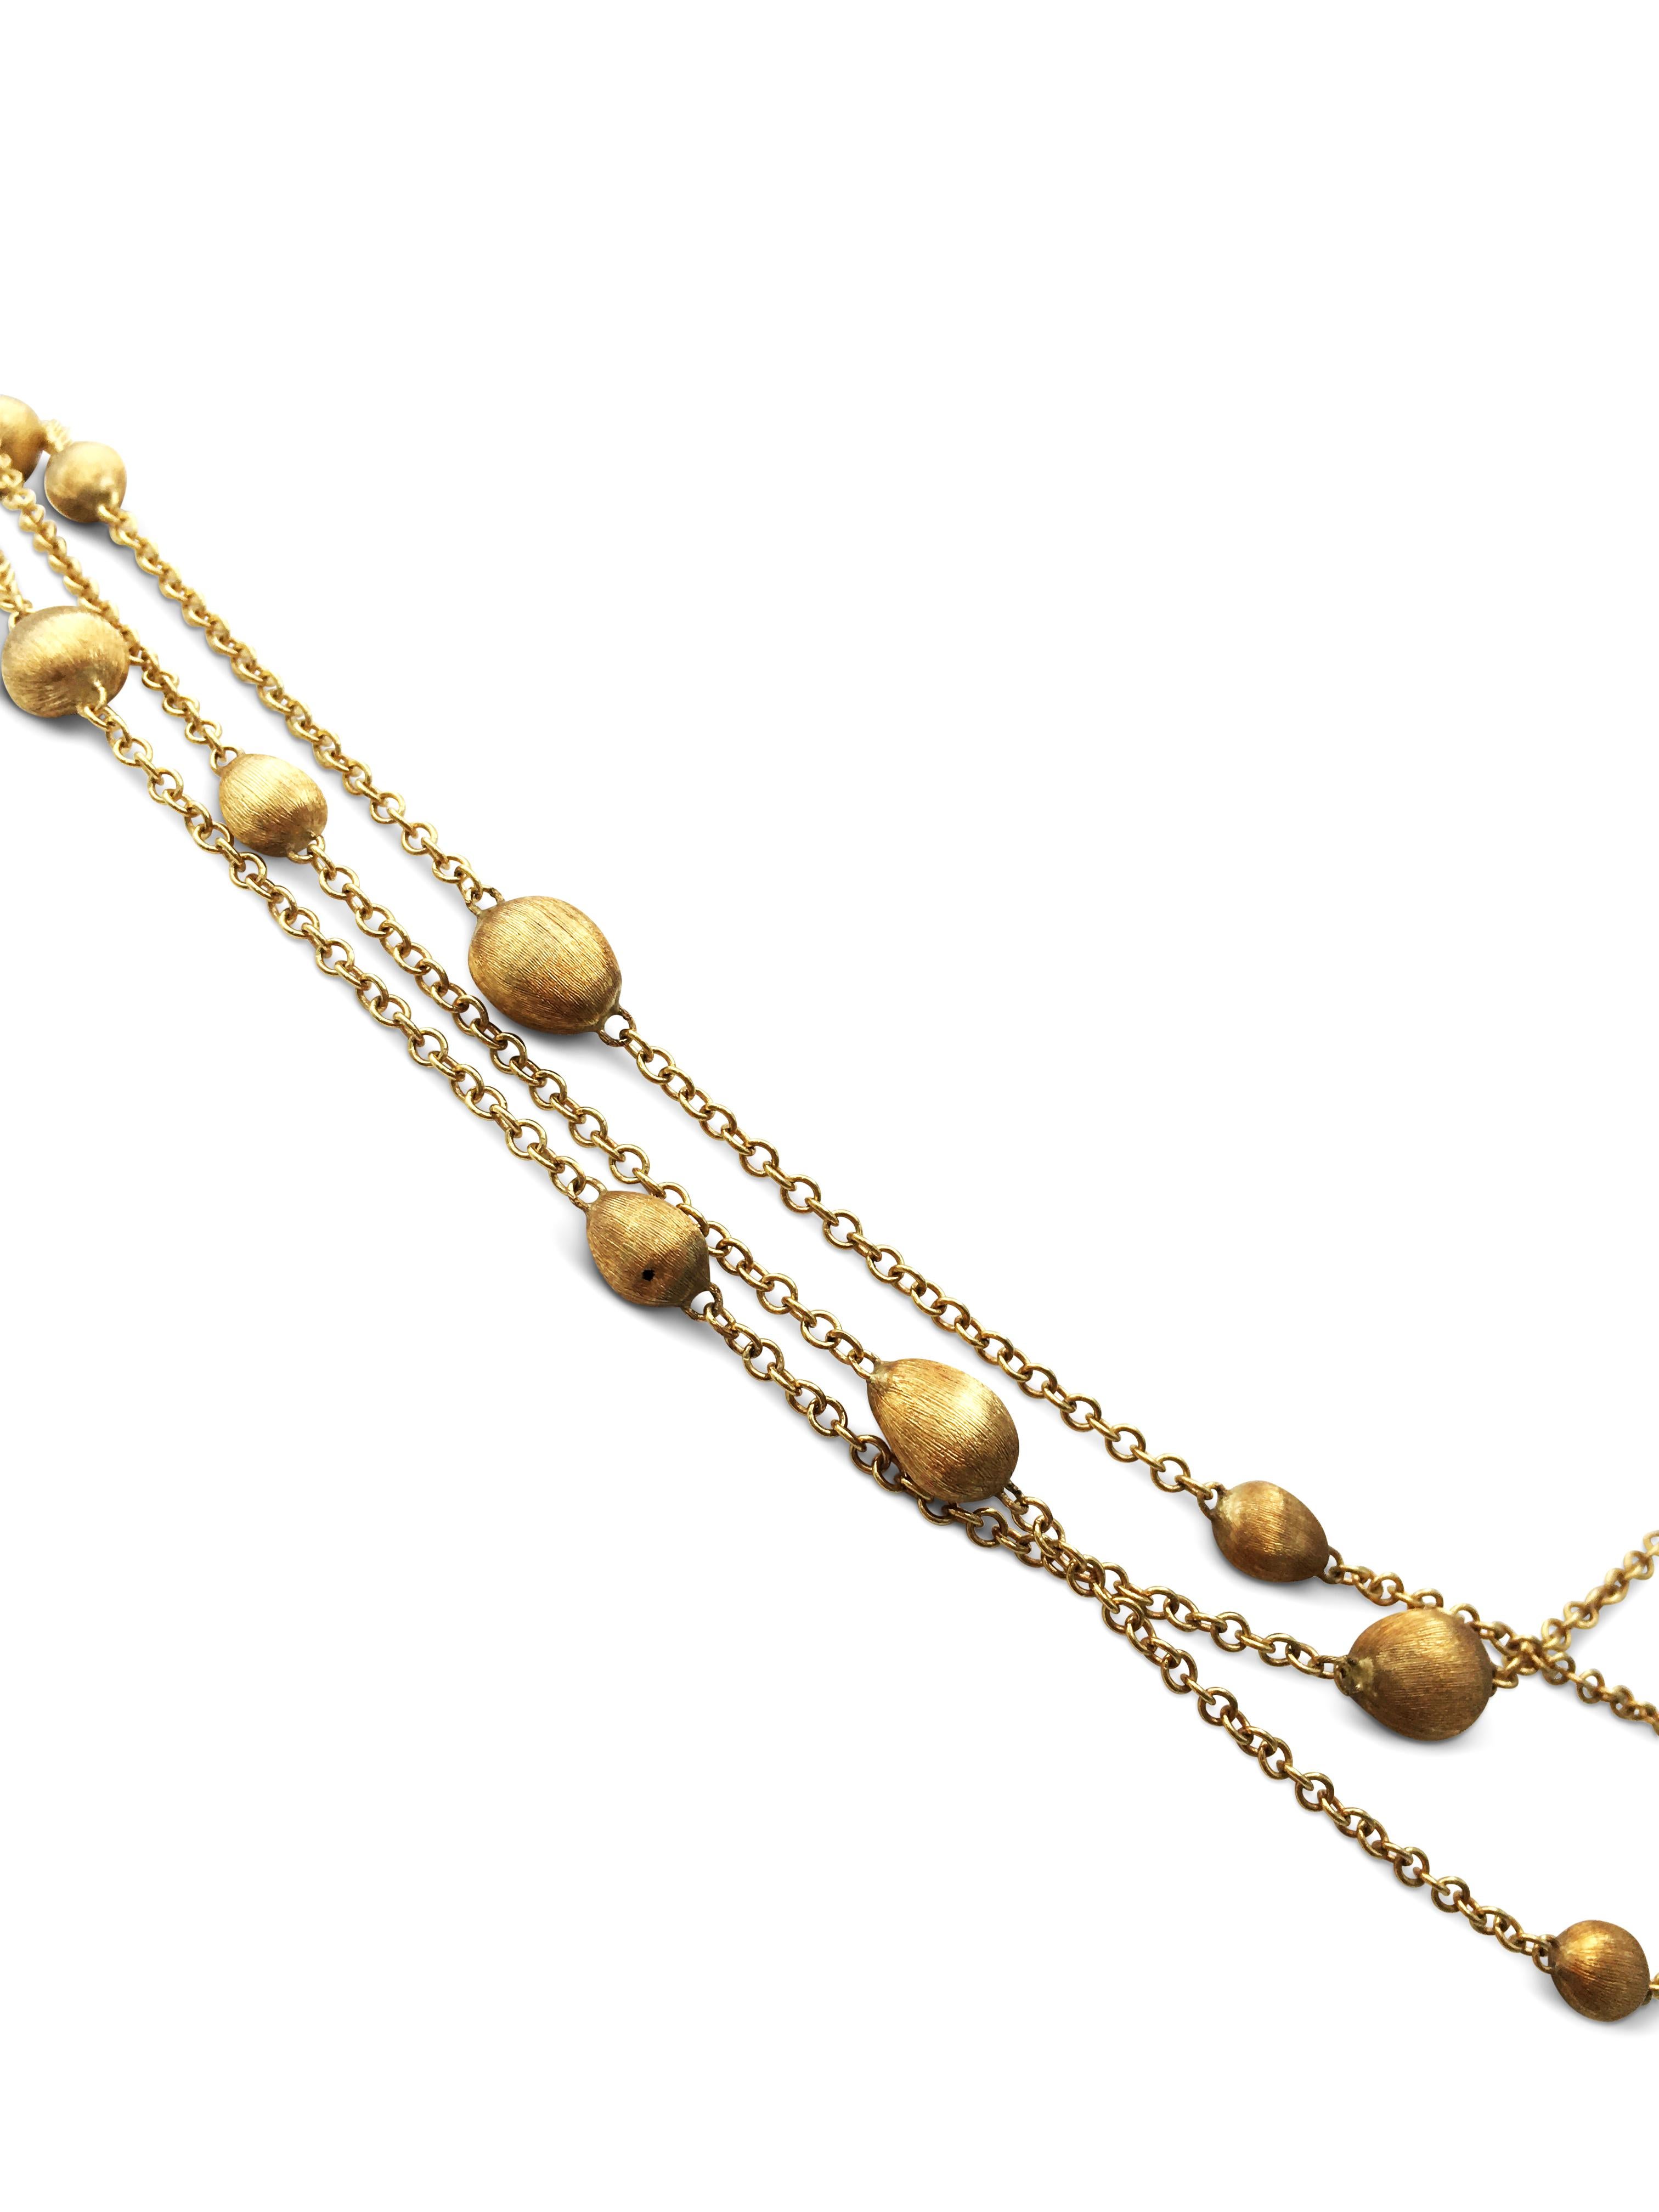 2 pawn gold necklace images